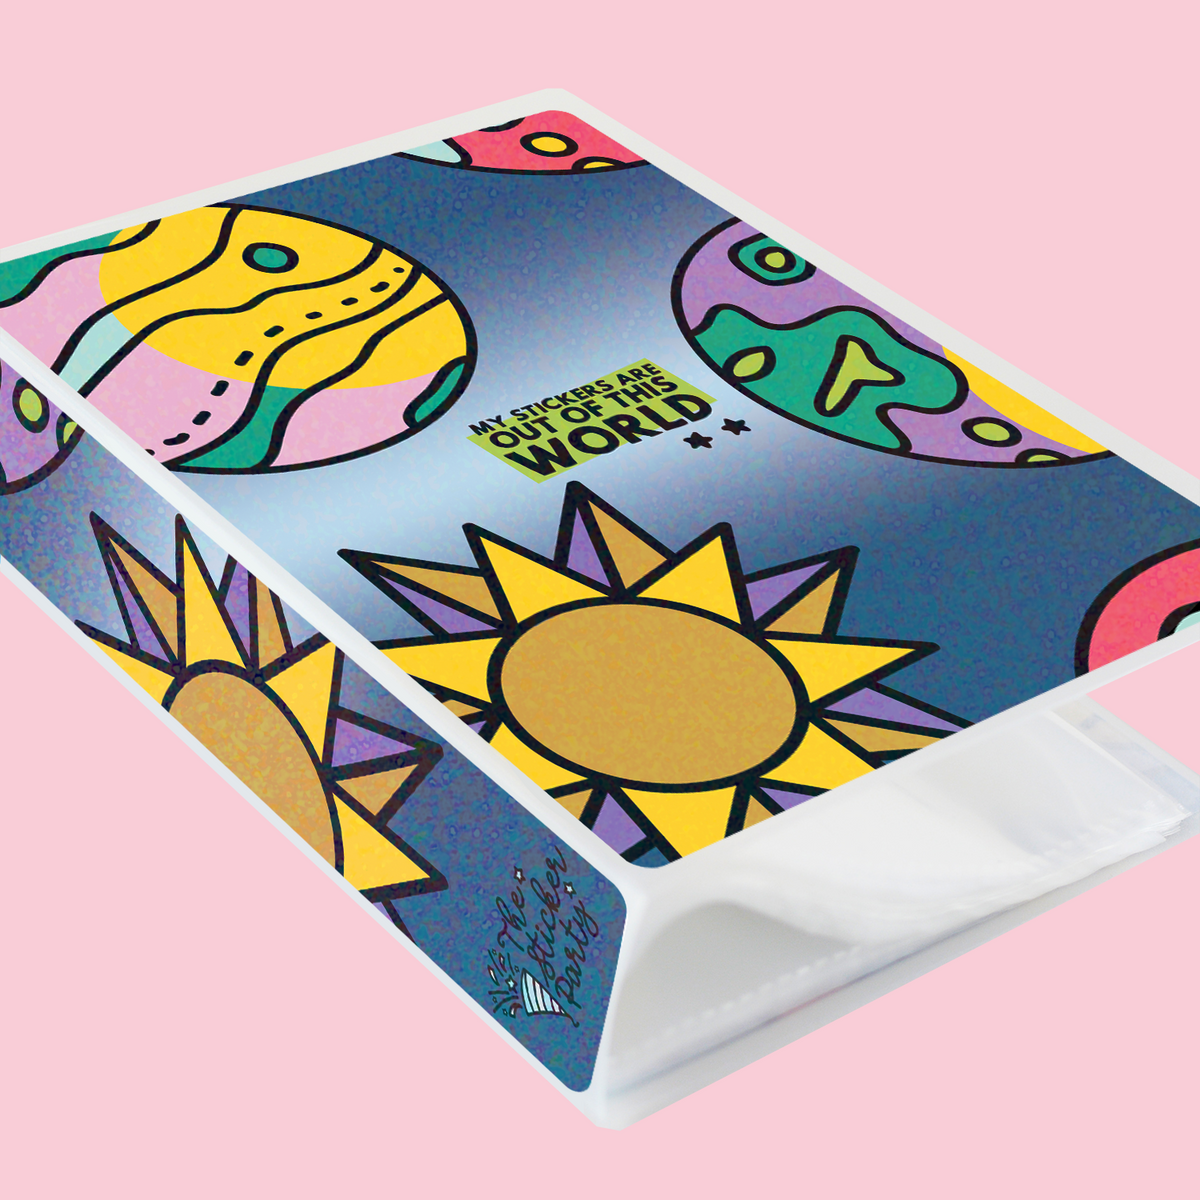 Out Of This World Planets Sticker Album or Reusable Sticker Book – The  Sticker Party